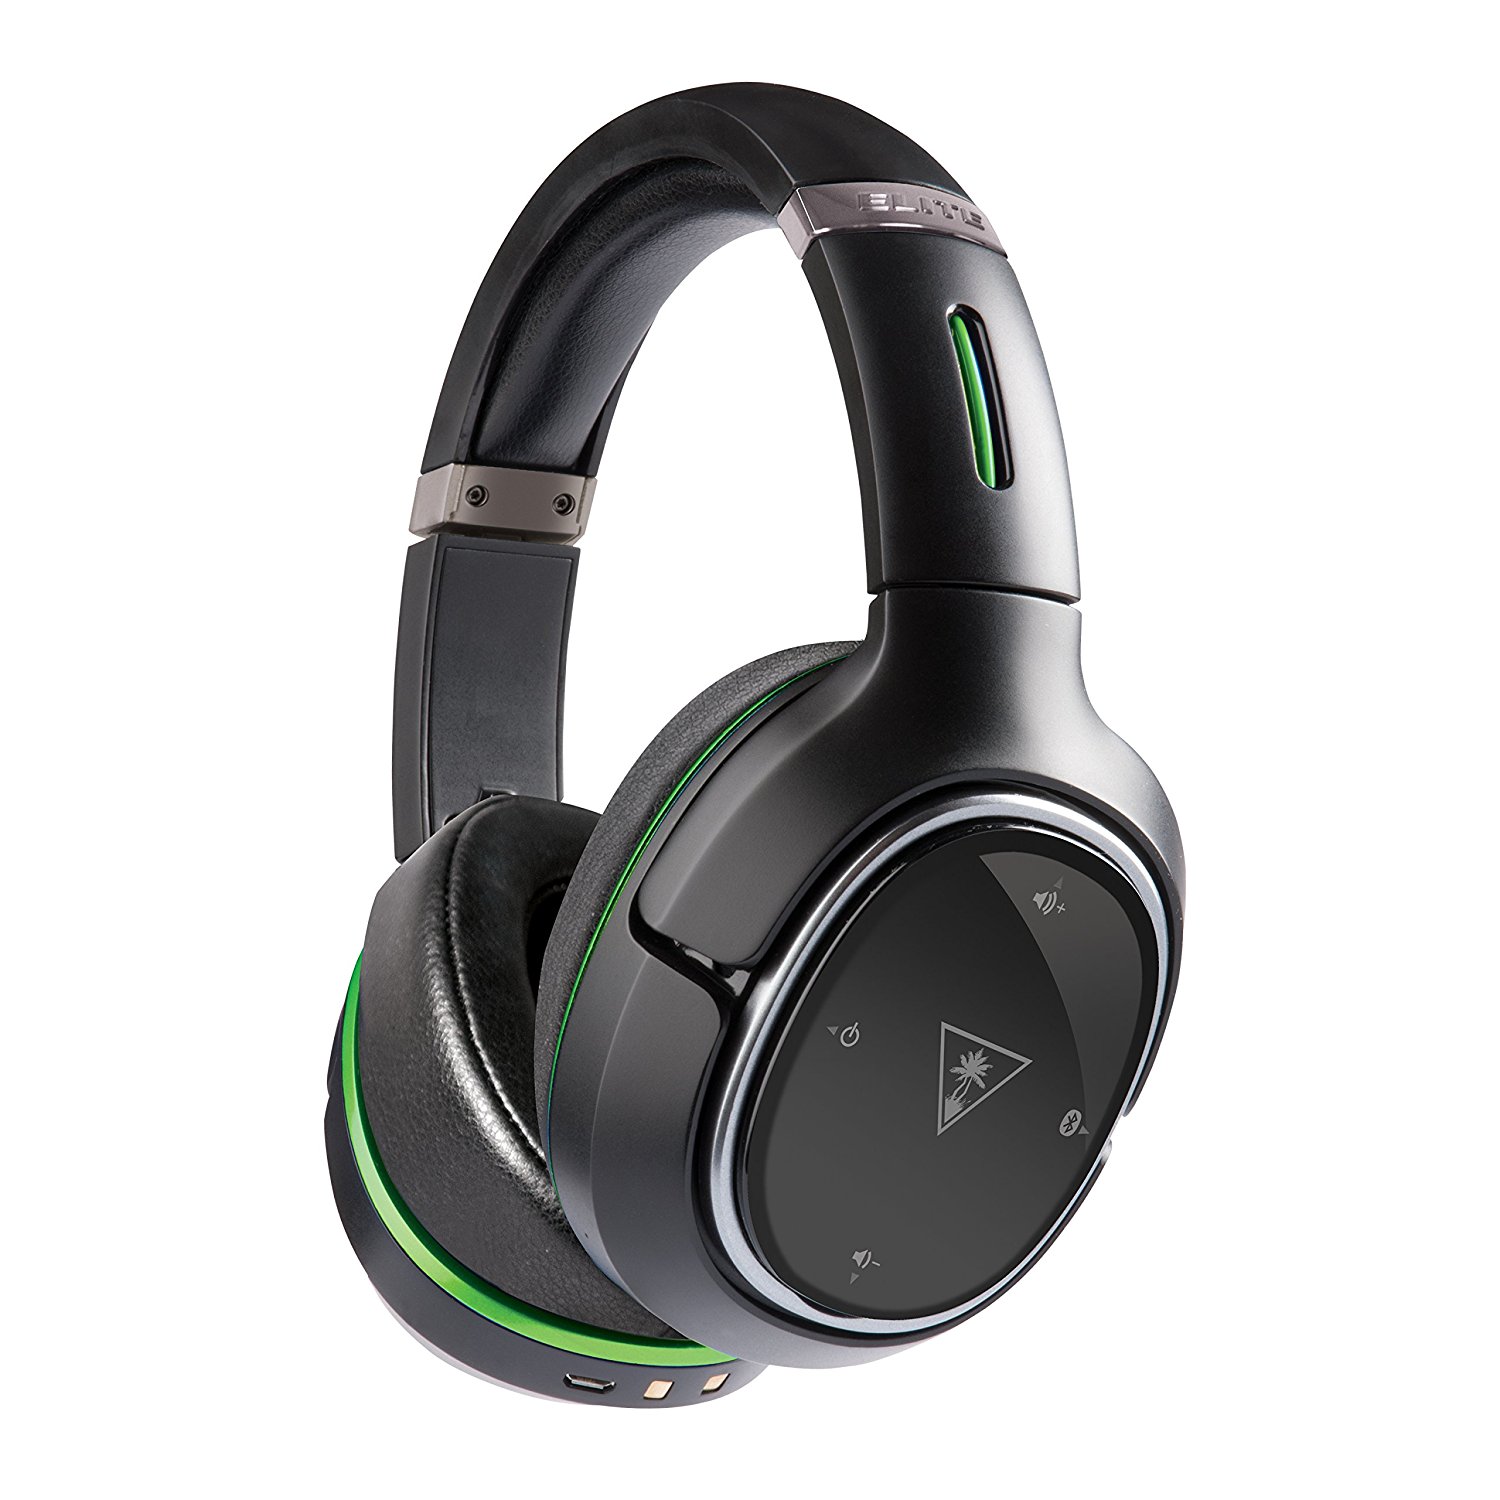 Turtle Beach - Ear Force Elite 800X Premium Fully Wireless Gaming Headset - DTS Headphone:X 7.1 Surround Sound - Noise Cancellation- Xbox One, Mobile Devices